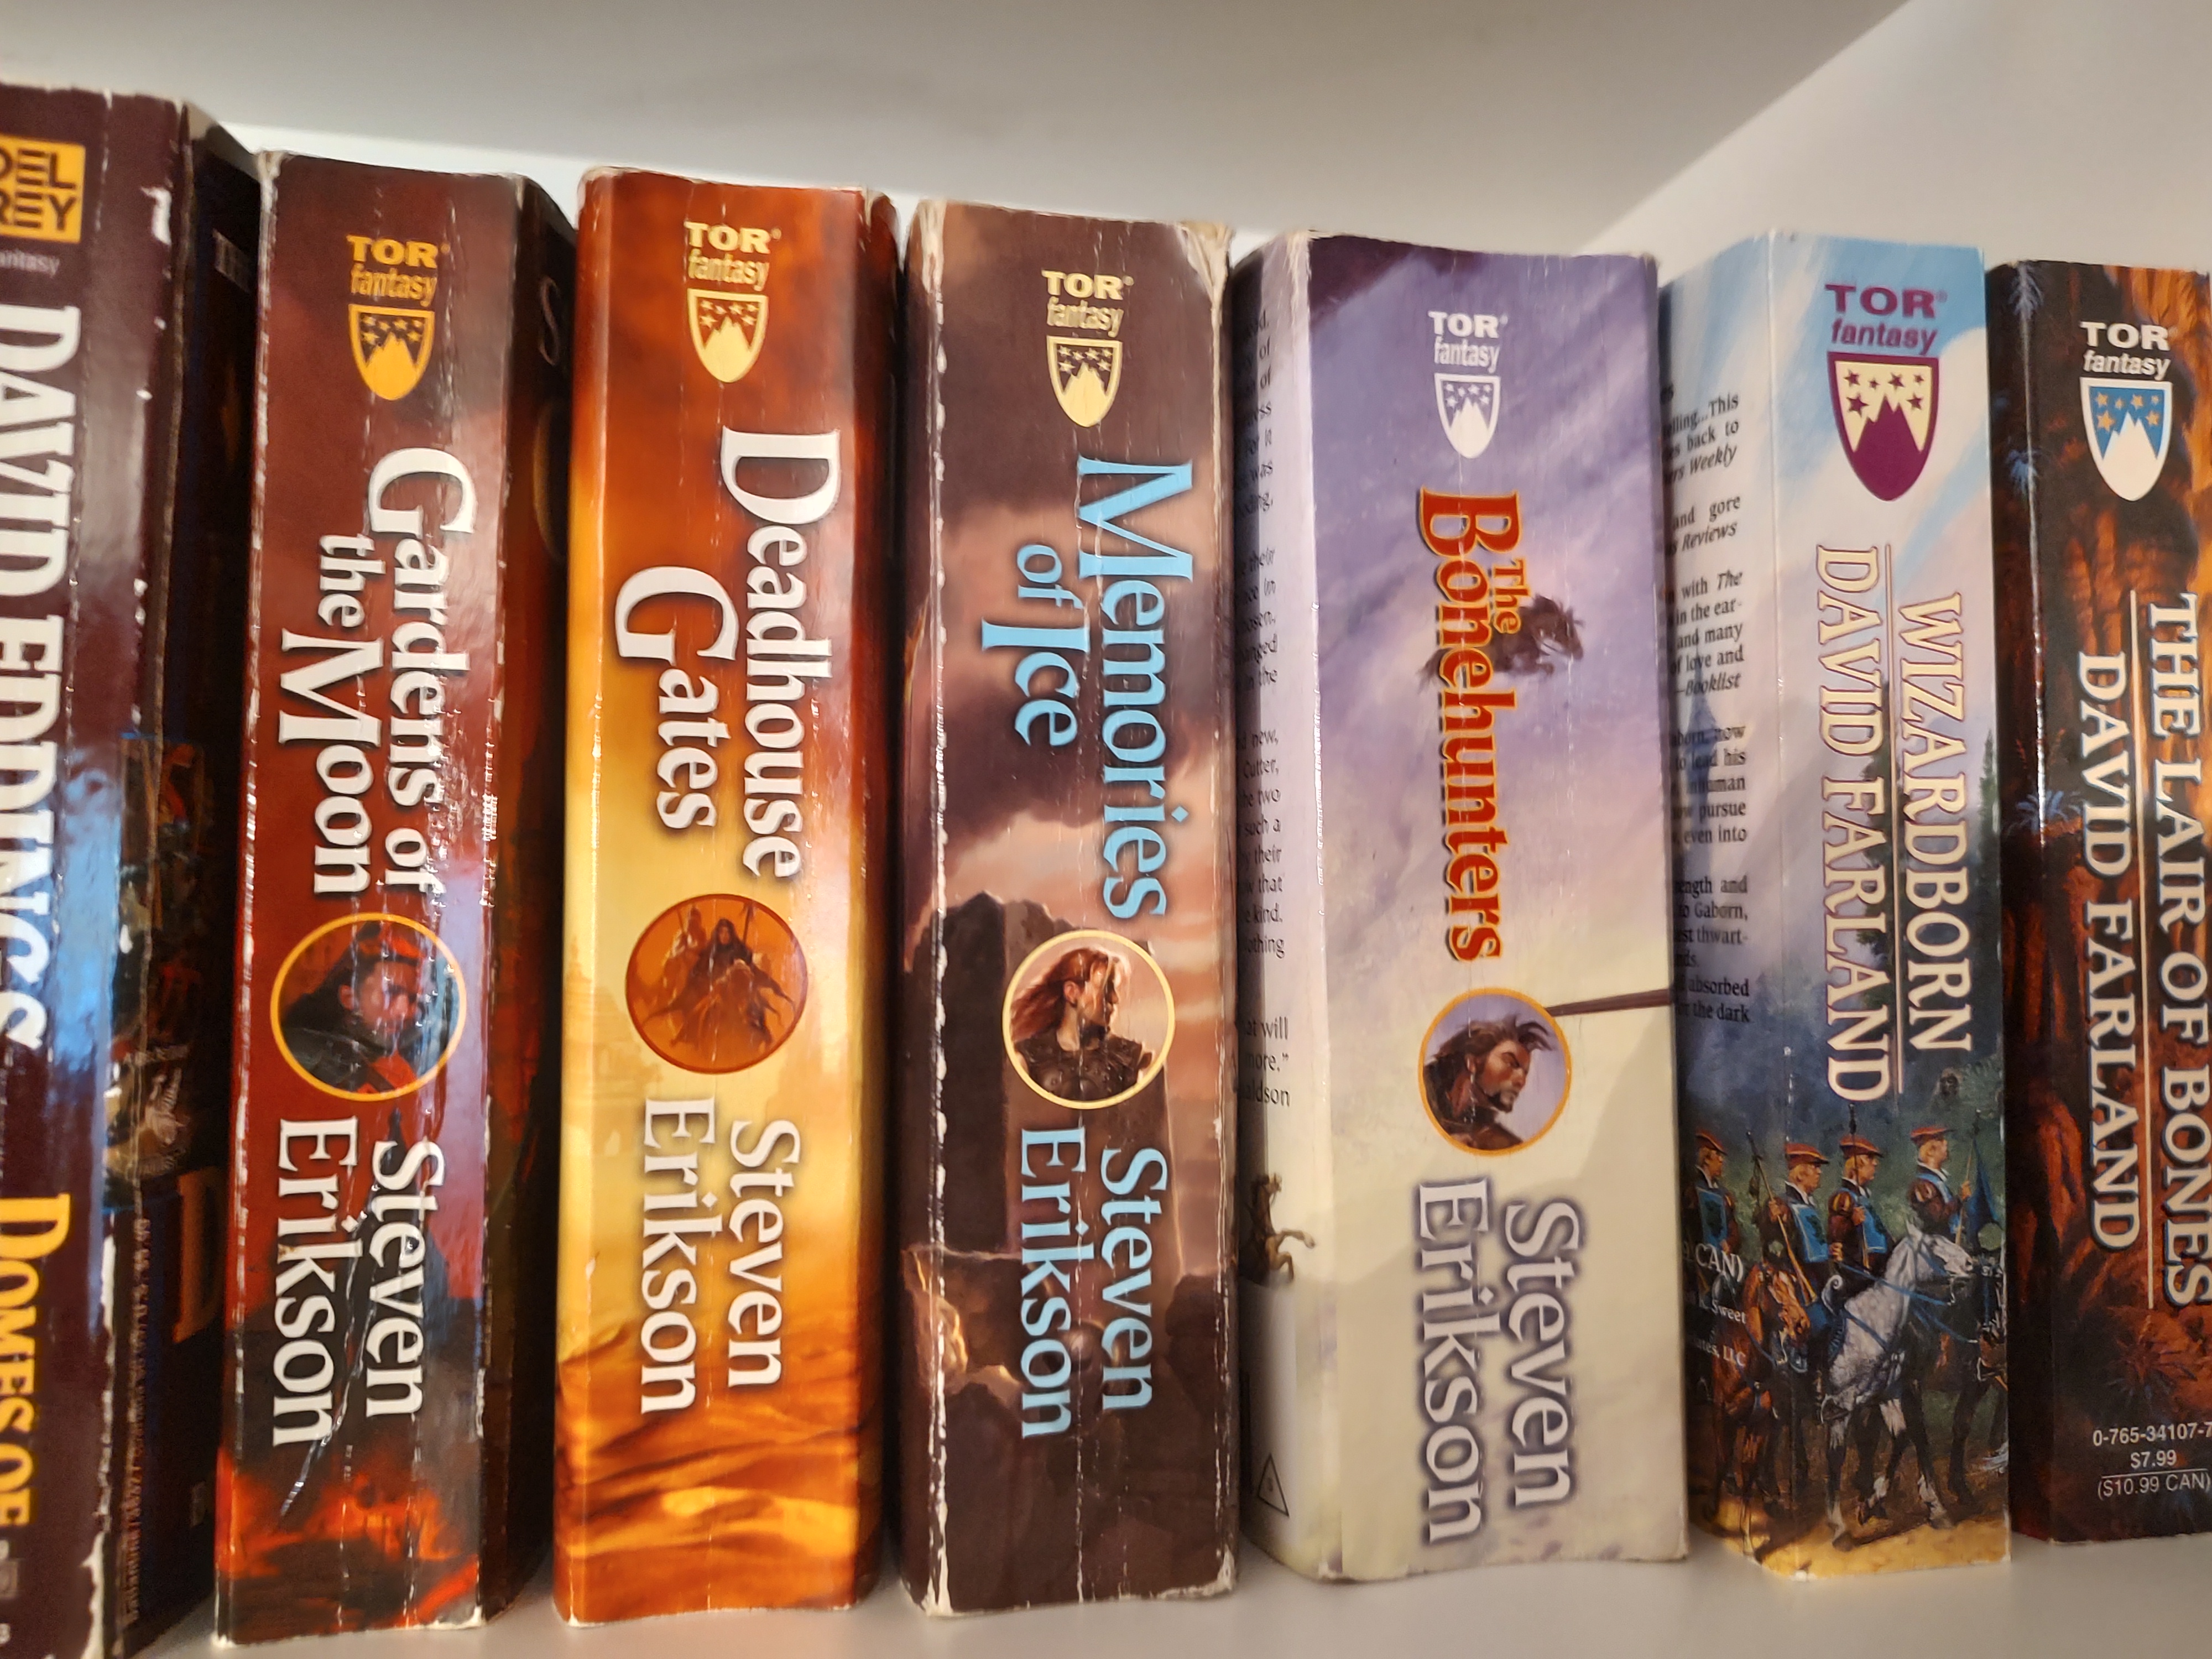 A few books in the Malazan Book of the Fallen Series by Steven Erikson